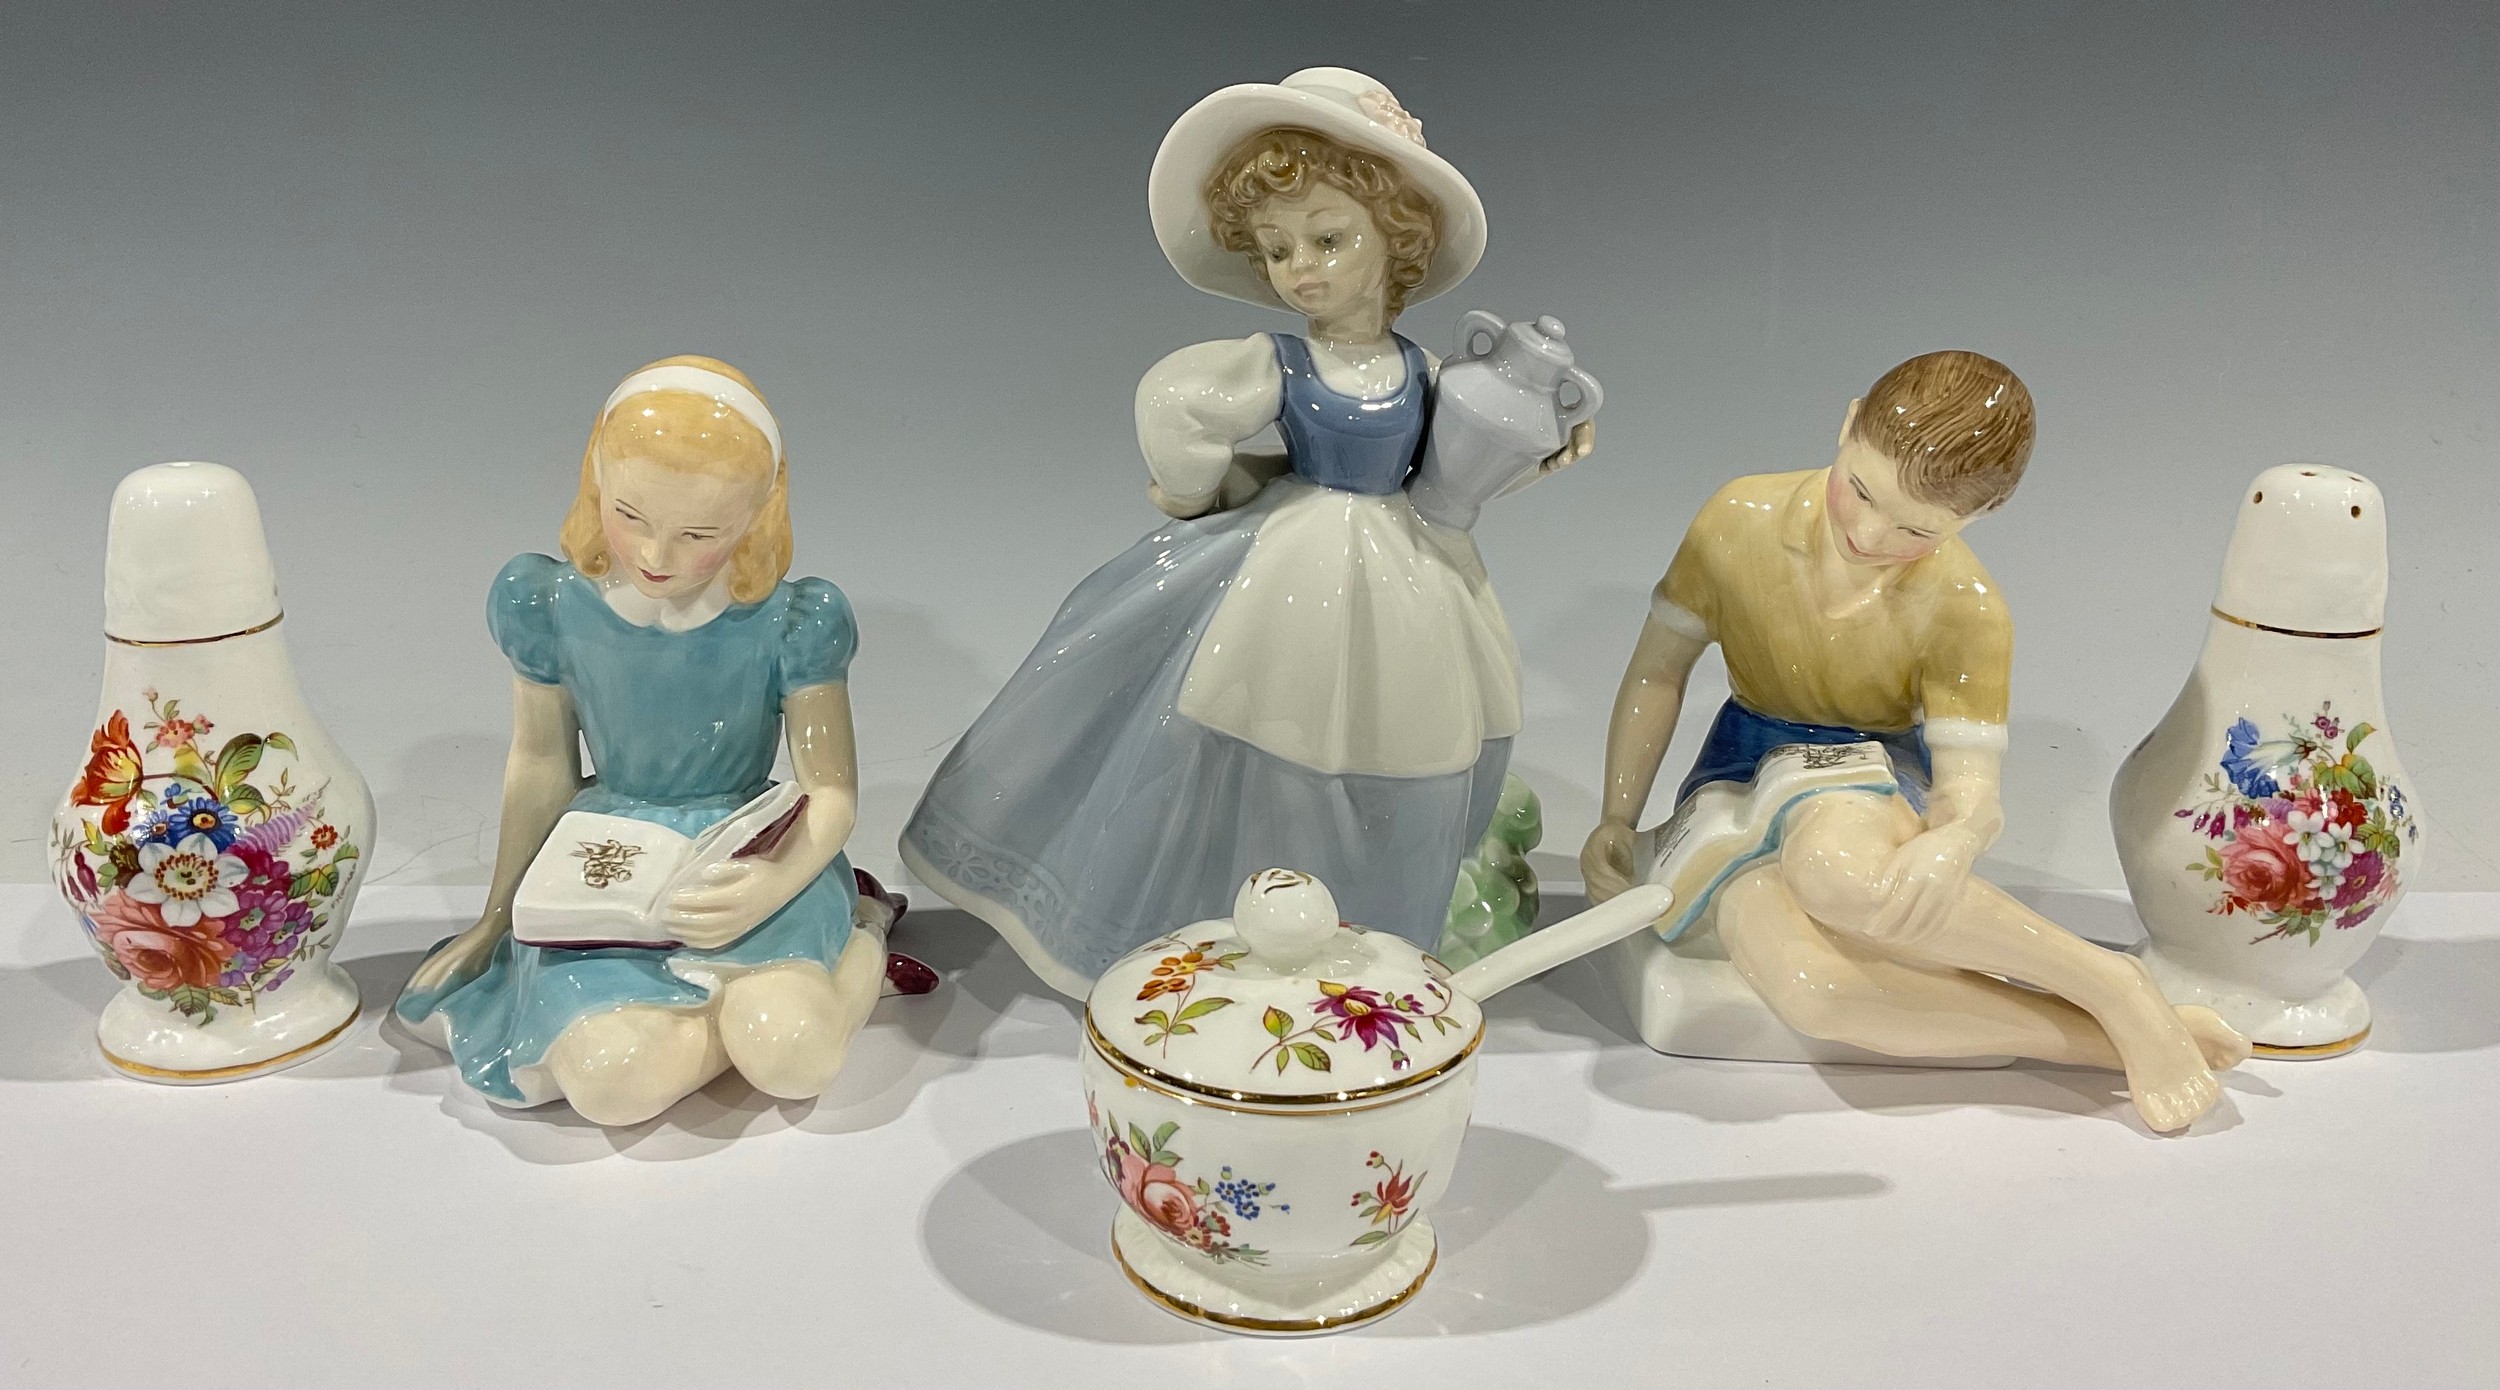 A Royal Doulton figure, Treasure Island, HN2243; another, Alice, HN2158; a Nao figure, Girl with